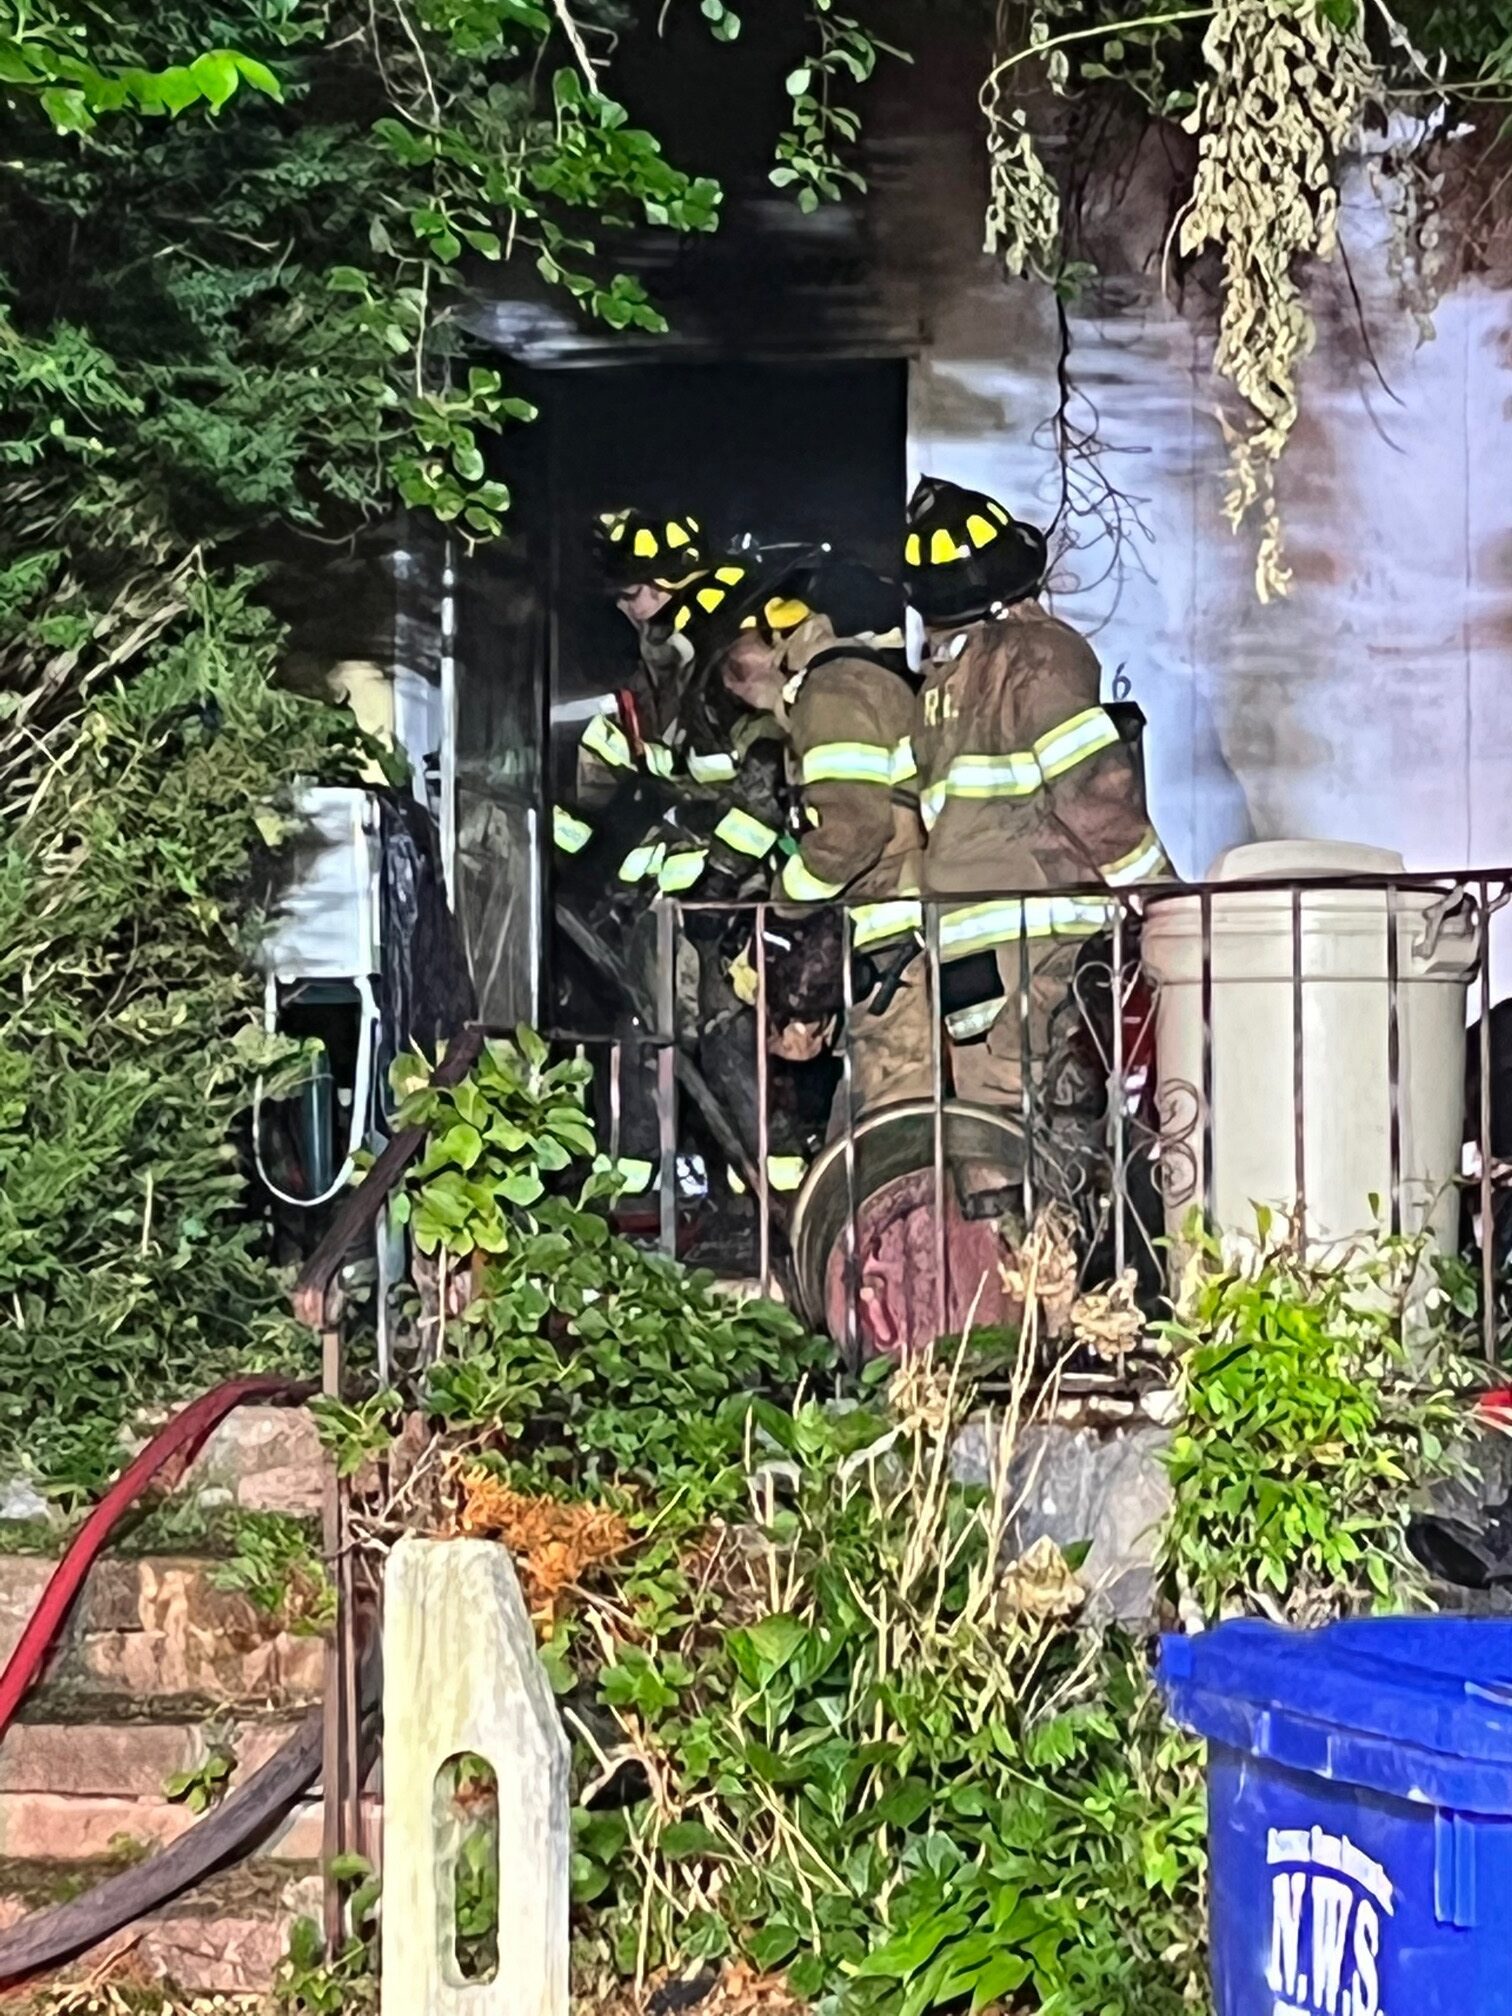 Firefighters battled a house fire on Wildwood Trail in Northampton on June 14. COURTESY RIVERHEAD FIRE DEPARTMENT